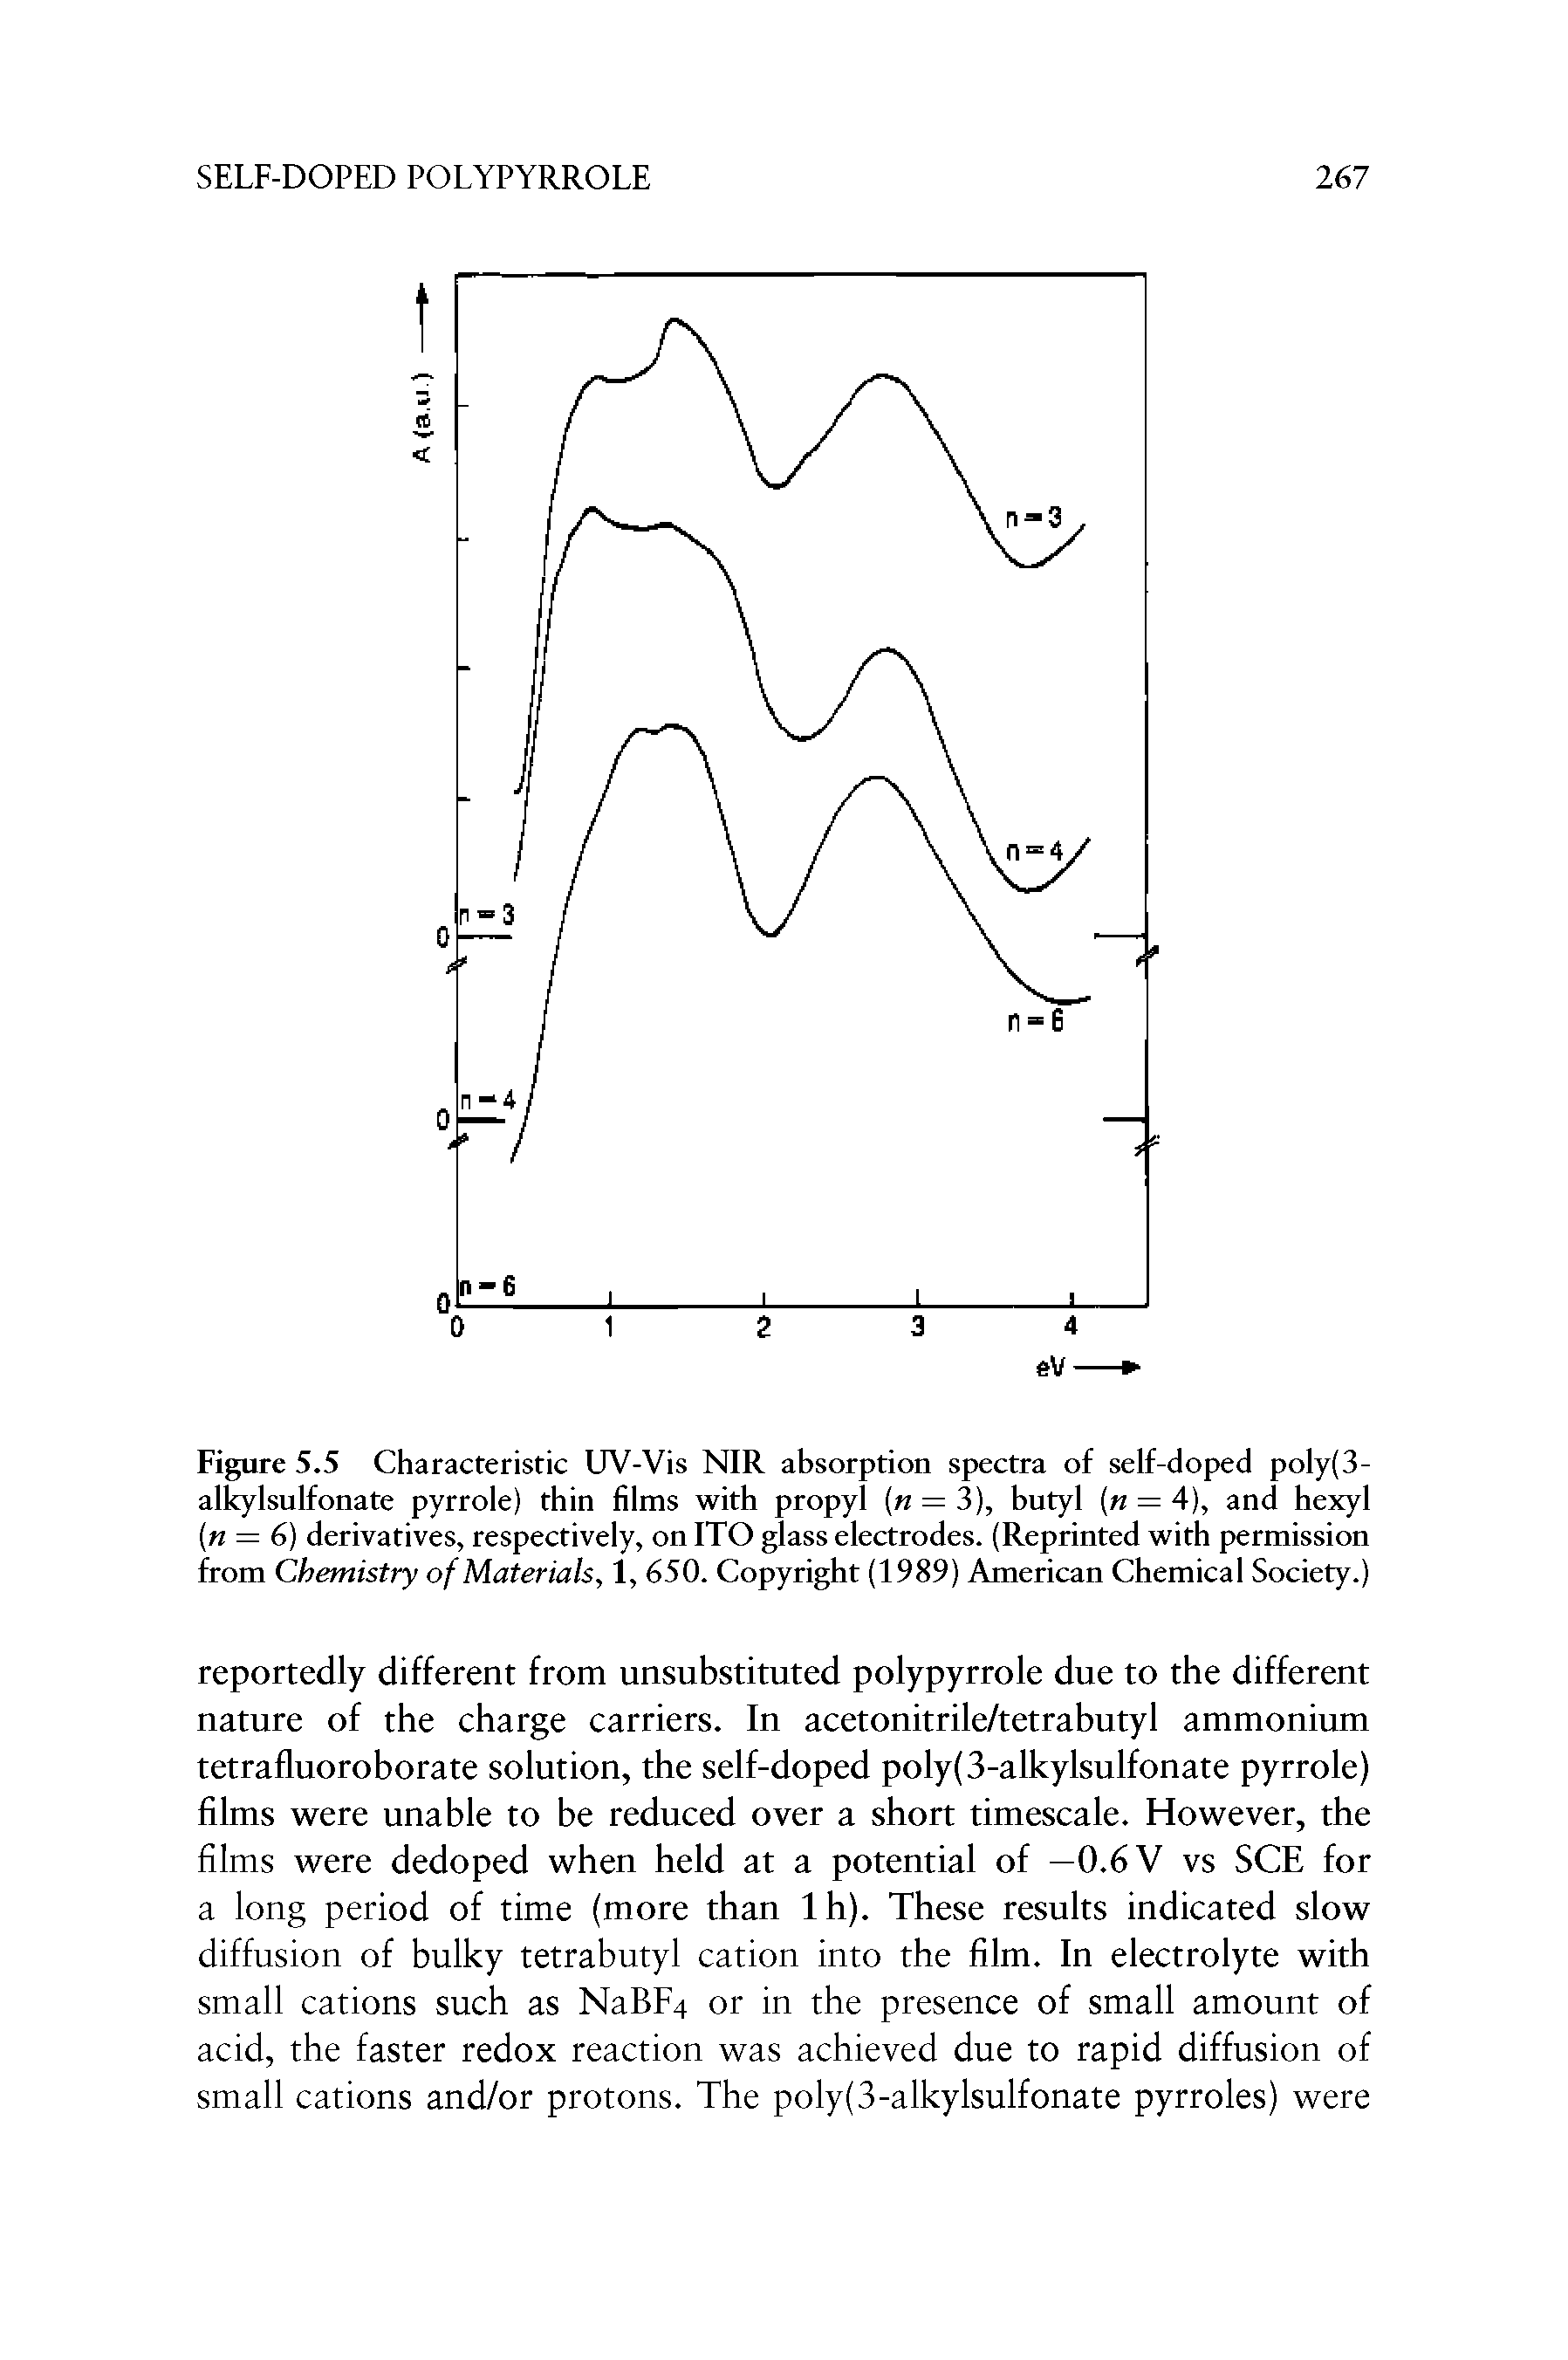 Figure 5.5 Characteristic UV-Vis NIR absorption spectra of self-doped poly(3-alkylsulfonate pyrrole) thin films with propyl (n = 3), butyl (n = 4), and hexyl ( = 6) derivatives, respectively, on ITO glass electrodes. (Reprinted with permission from Chemistry of Materials, 1, 650. Copyright (1989) American Chemical Society.)...